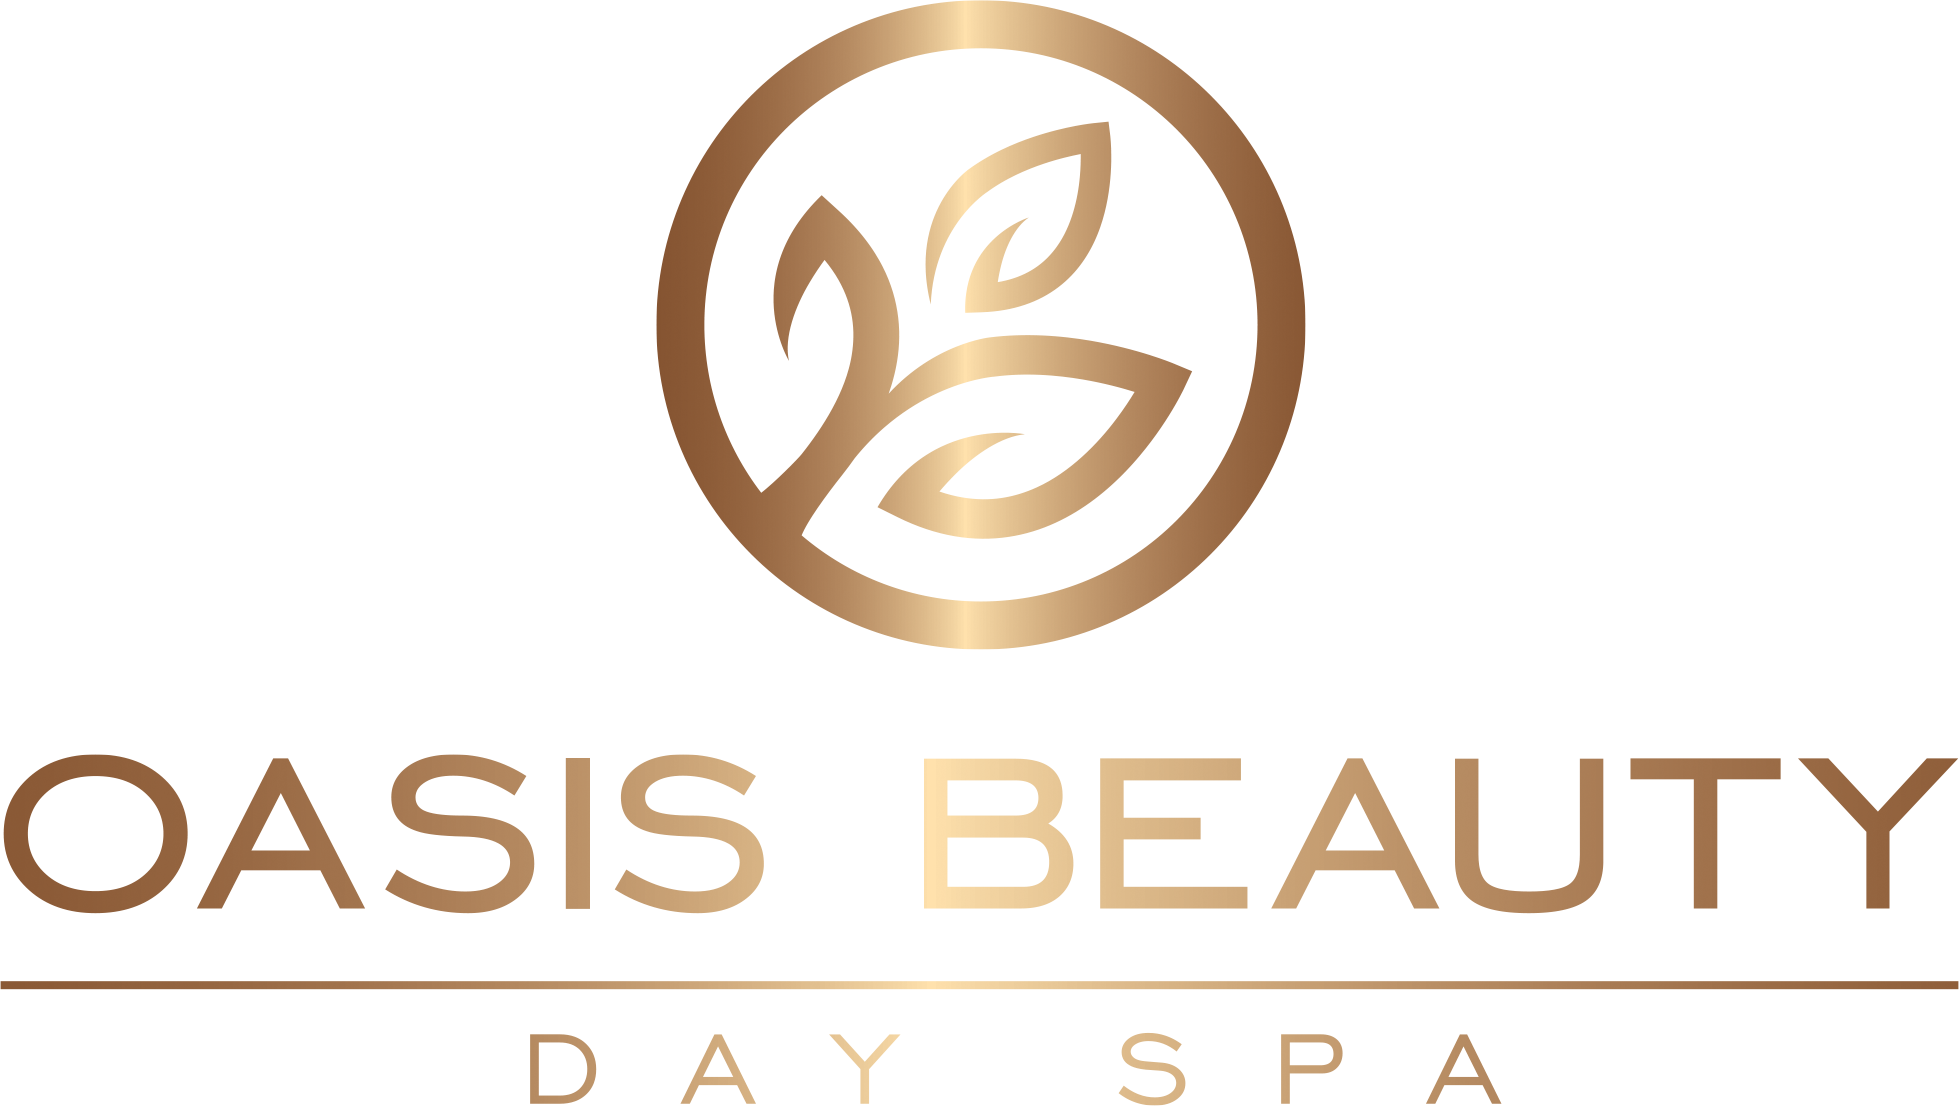 OASIS BEAUTY DAY SPA